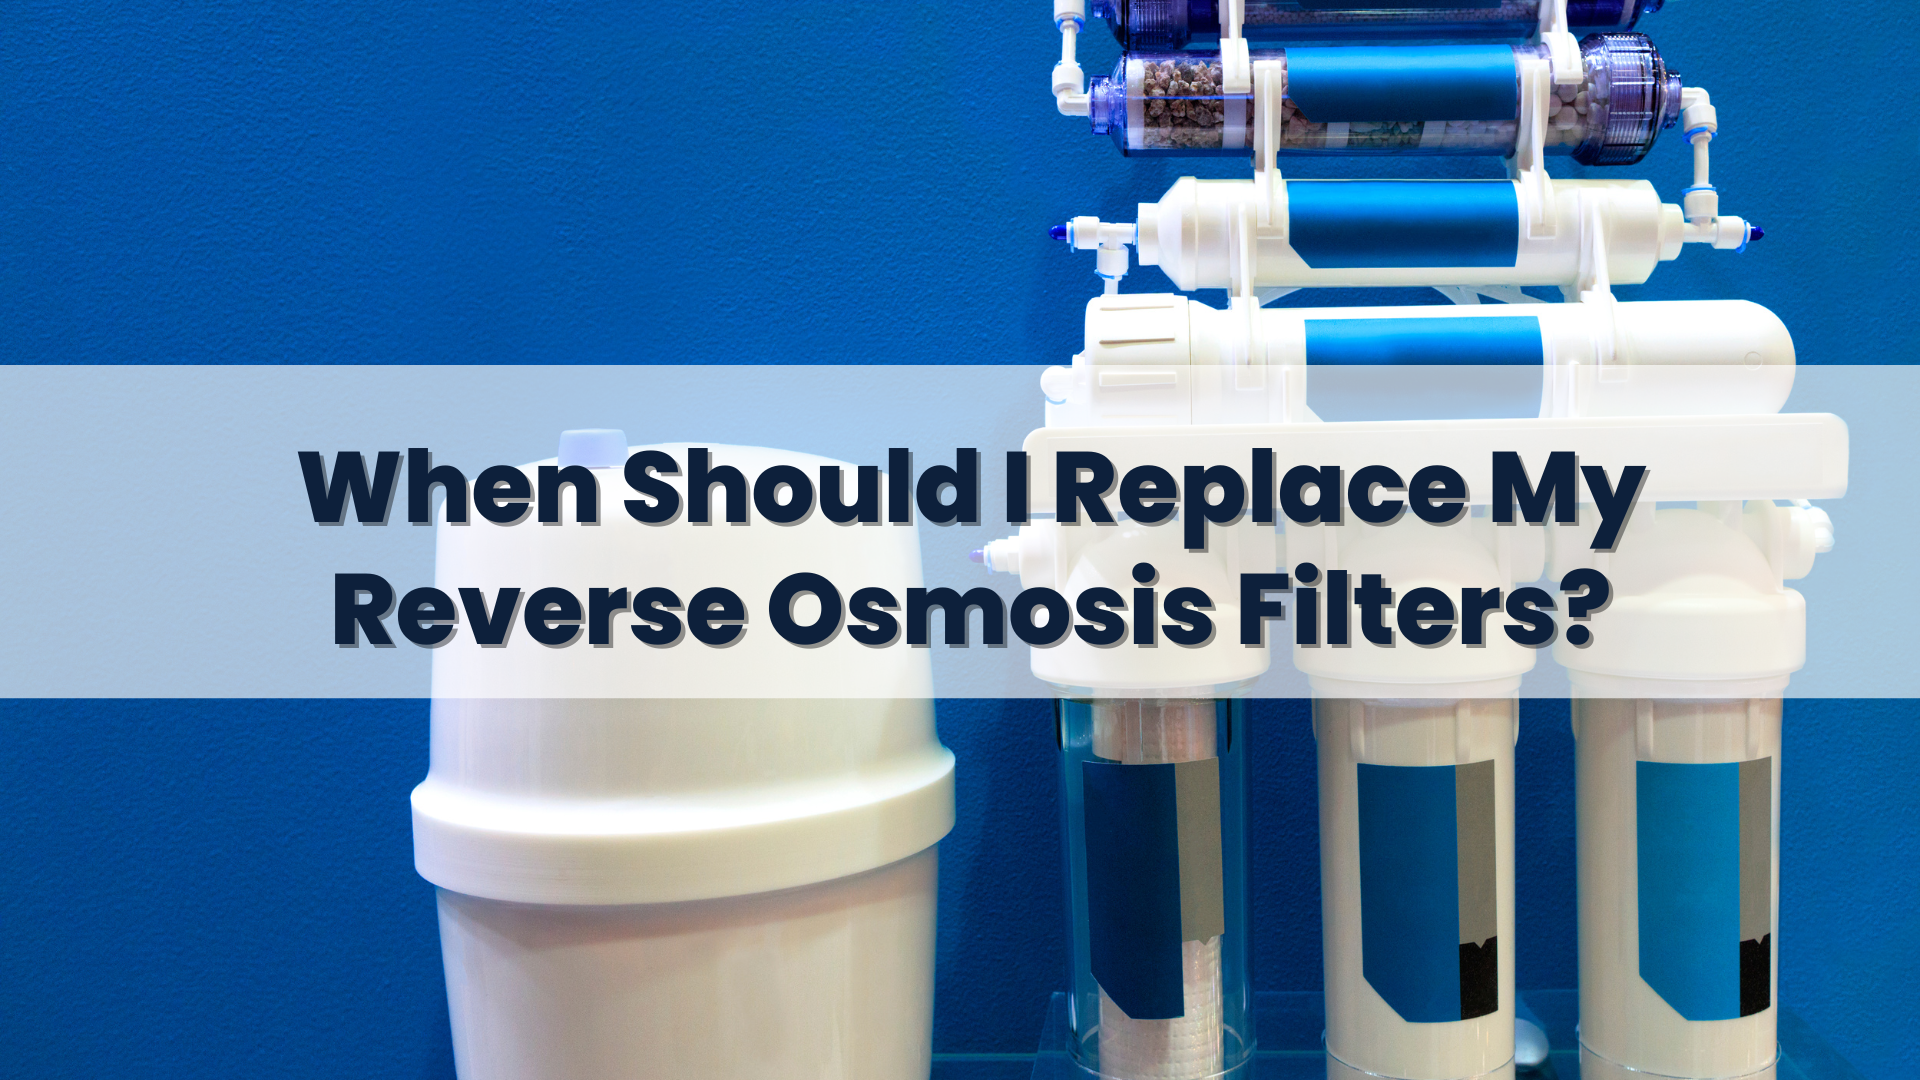 When Should I Replace My Reverse Osmosis Filters